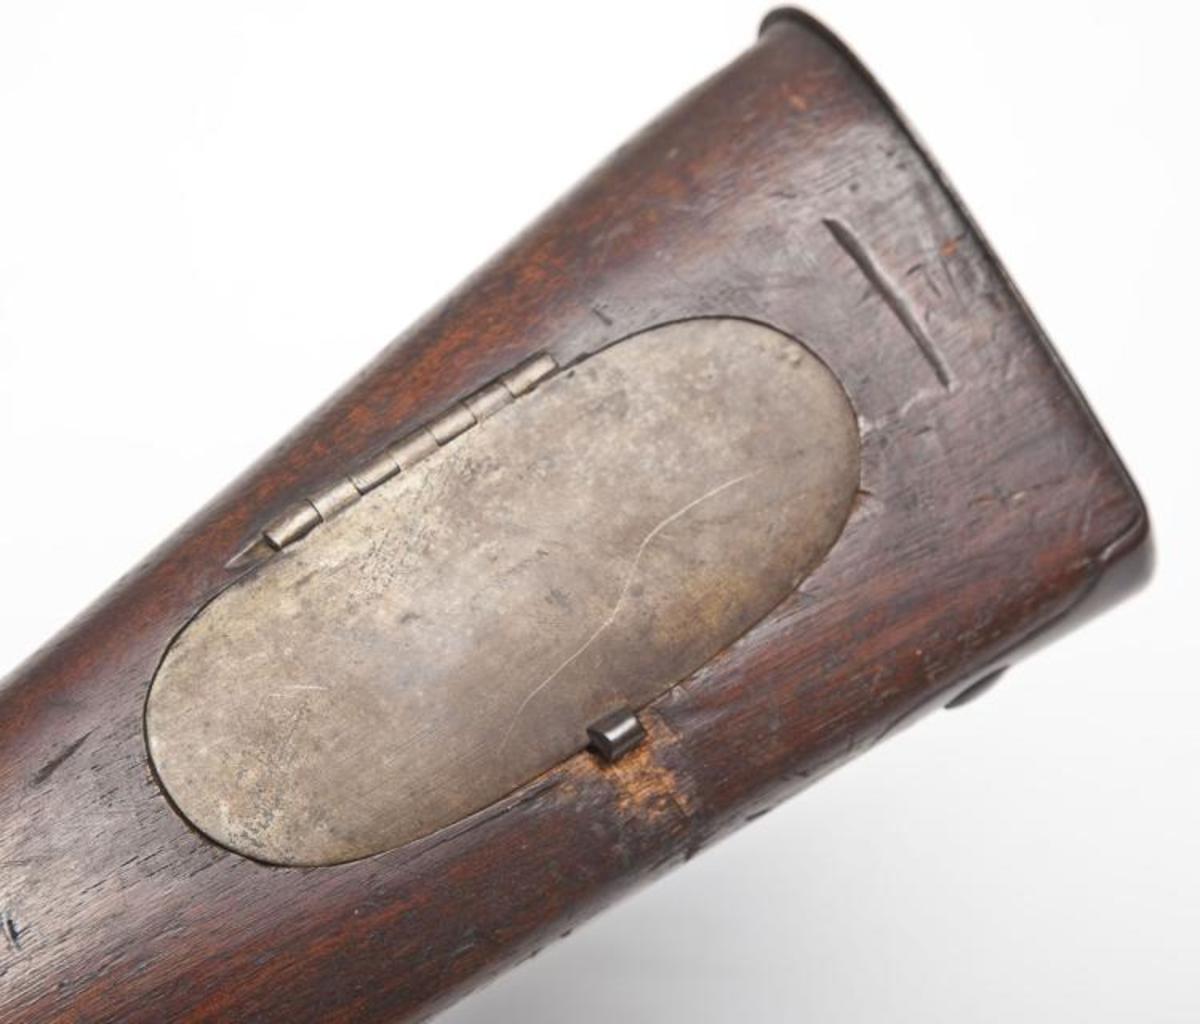 Hinged patchbox cover of a Model 1817 rifle.